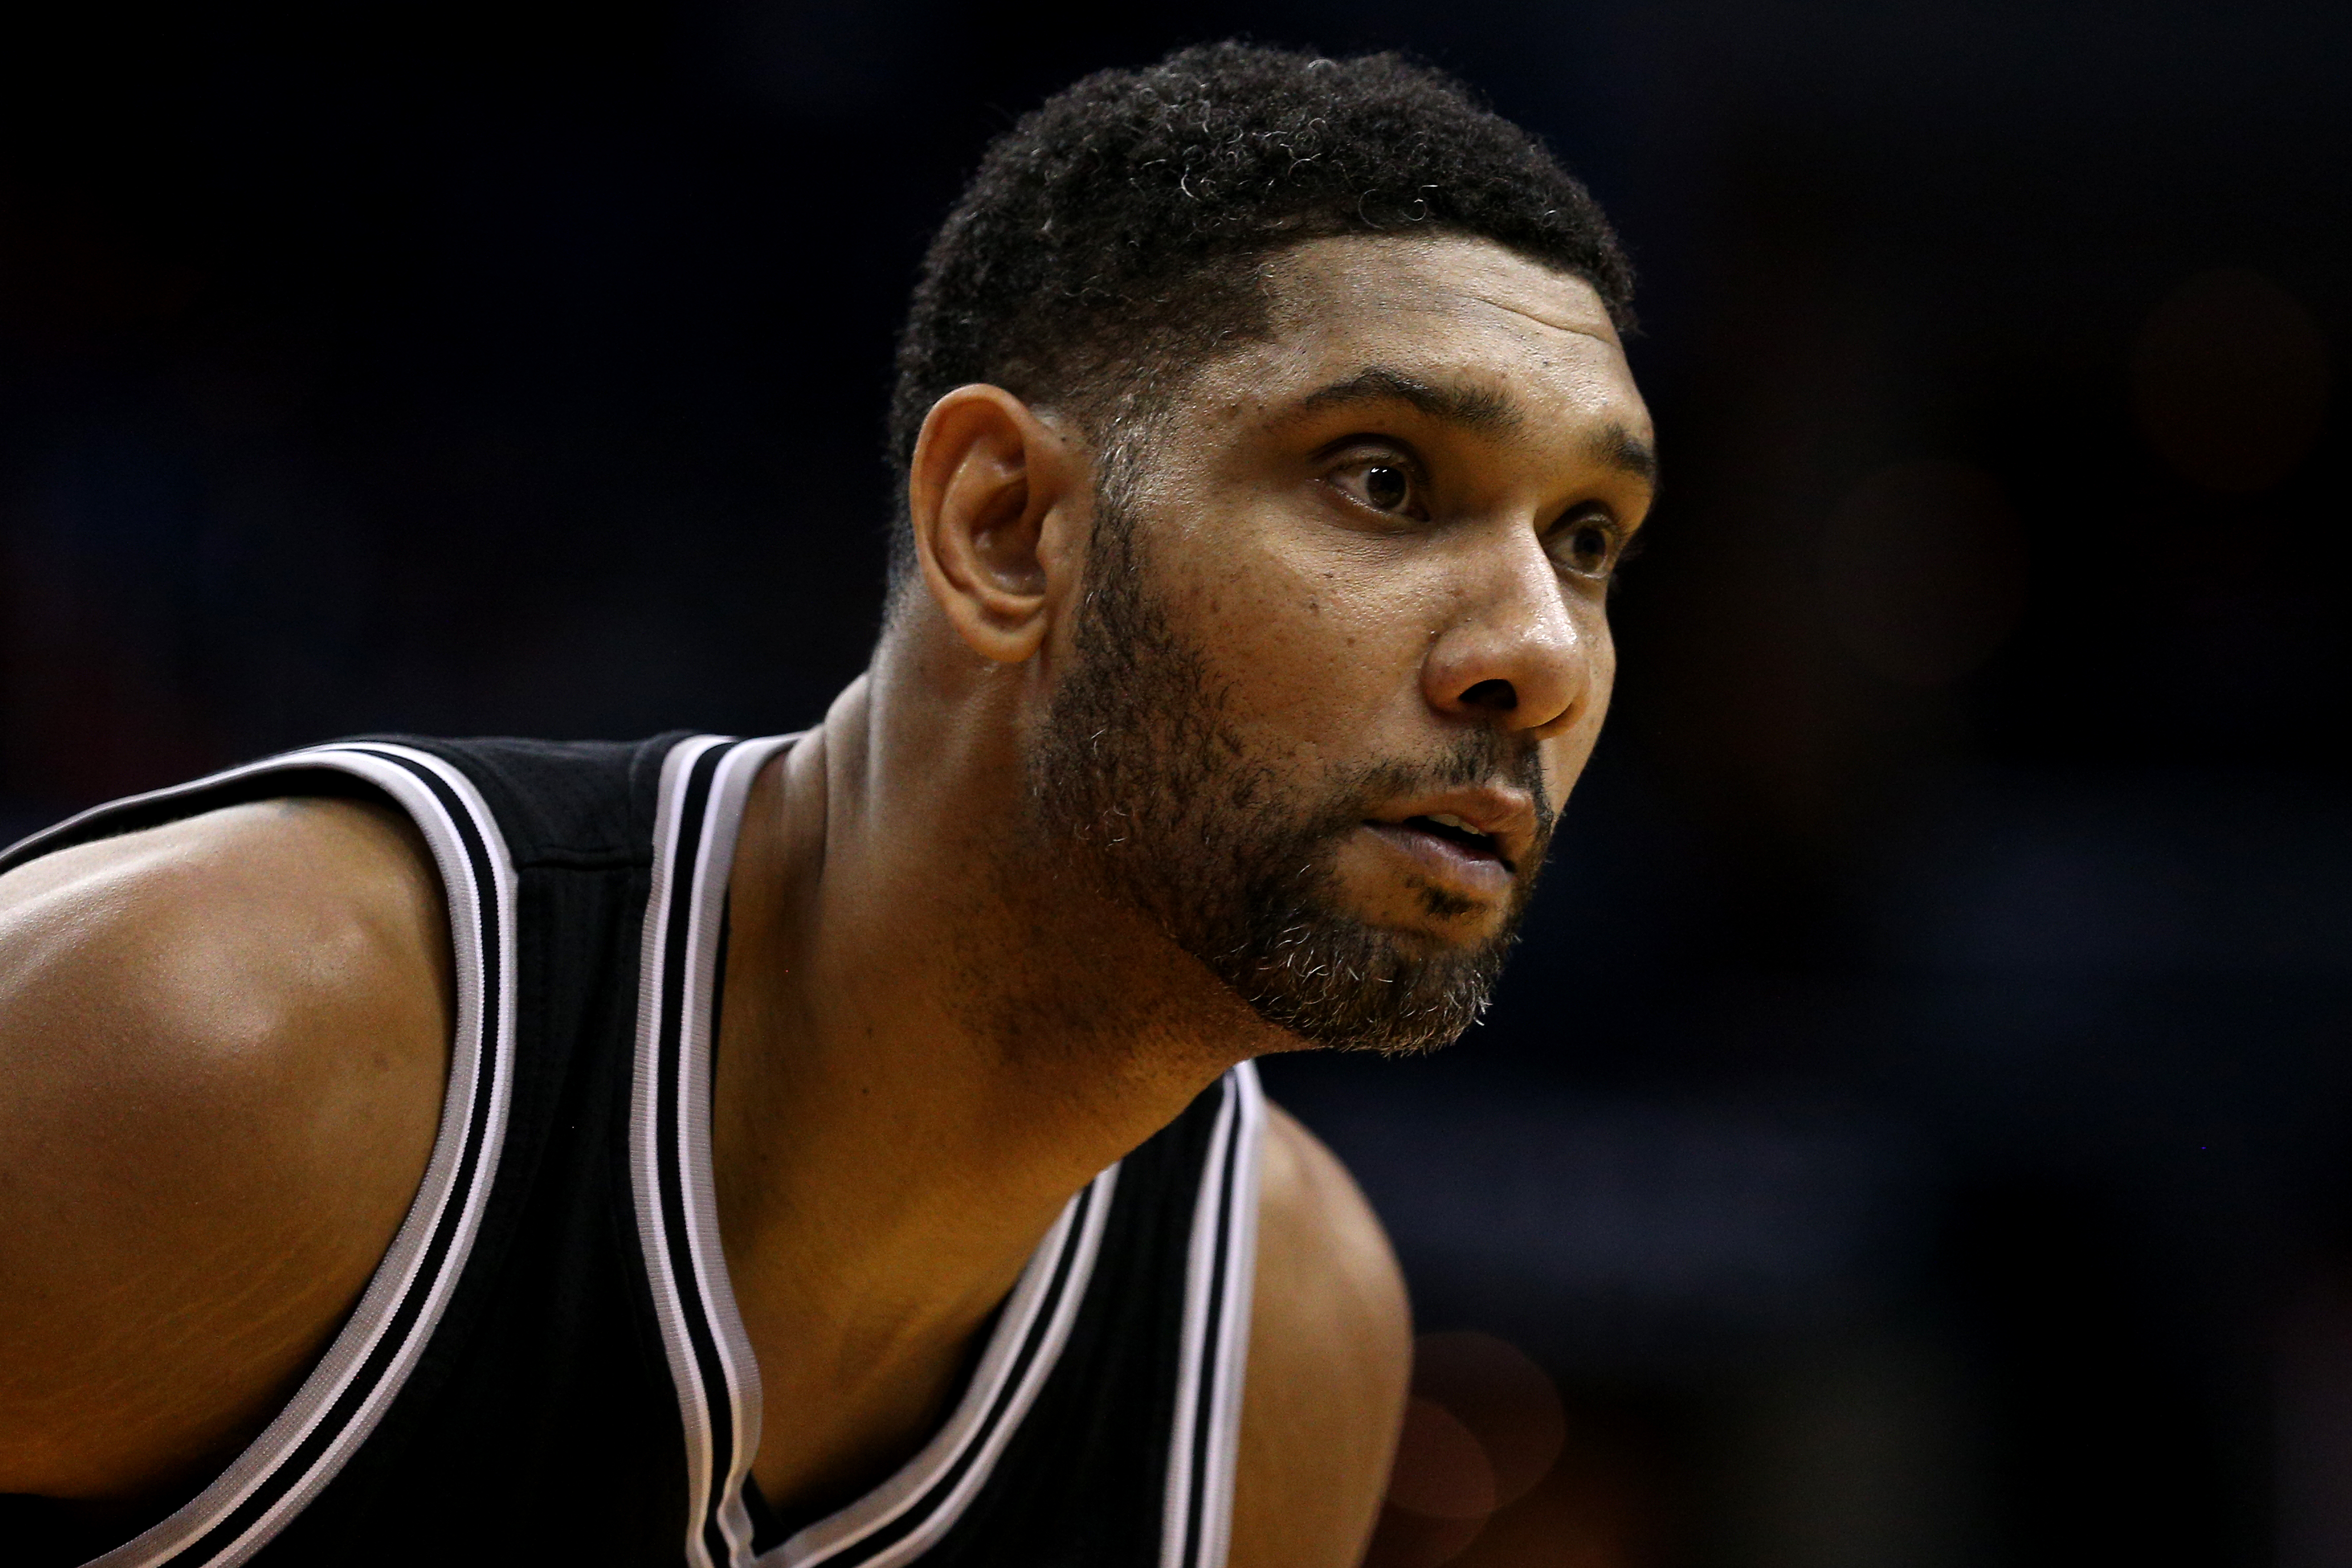 WASHINGTON, DC - NOVEMBER 04: Tim Duncan #21 of the San Antonio Spurs looks on against the Washington Wizards during the first half at Verizon Center on November 4, 2015 in Washington, DC. NOTE TO USER: User expressly acknowledges and agrees that, by downloading and or using this photograph, User is consenting to the terms and conditions of the Getty Images License Agreement. Patrick Smith/Getty Images/AFP